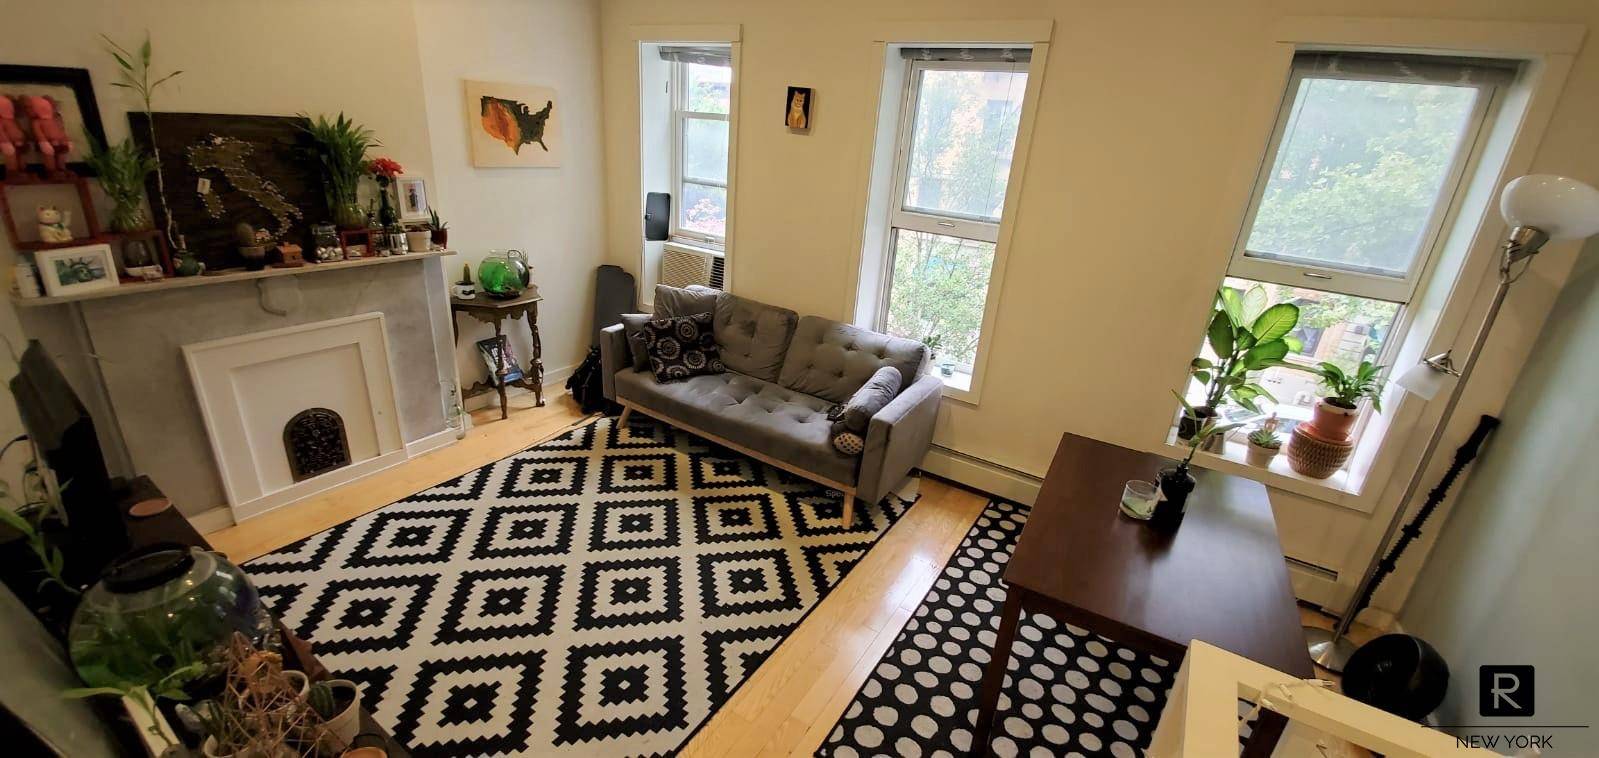 Spacious two bedroom apartment in beautiful tree lined block in Park Slope.